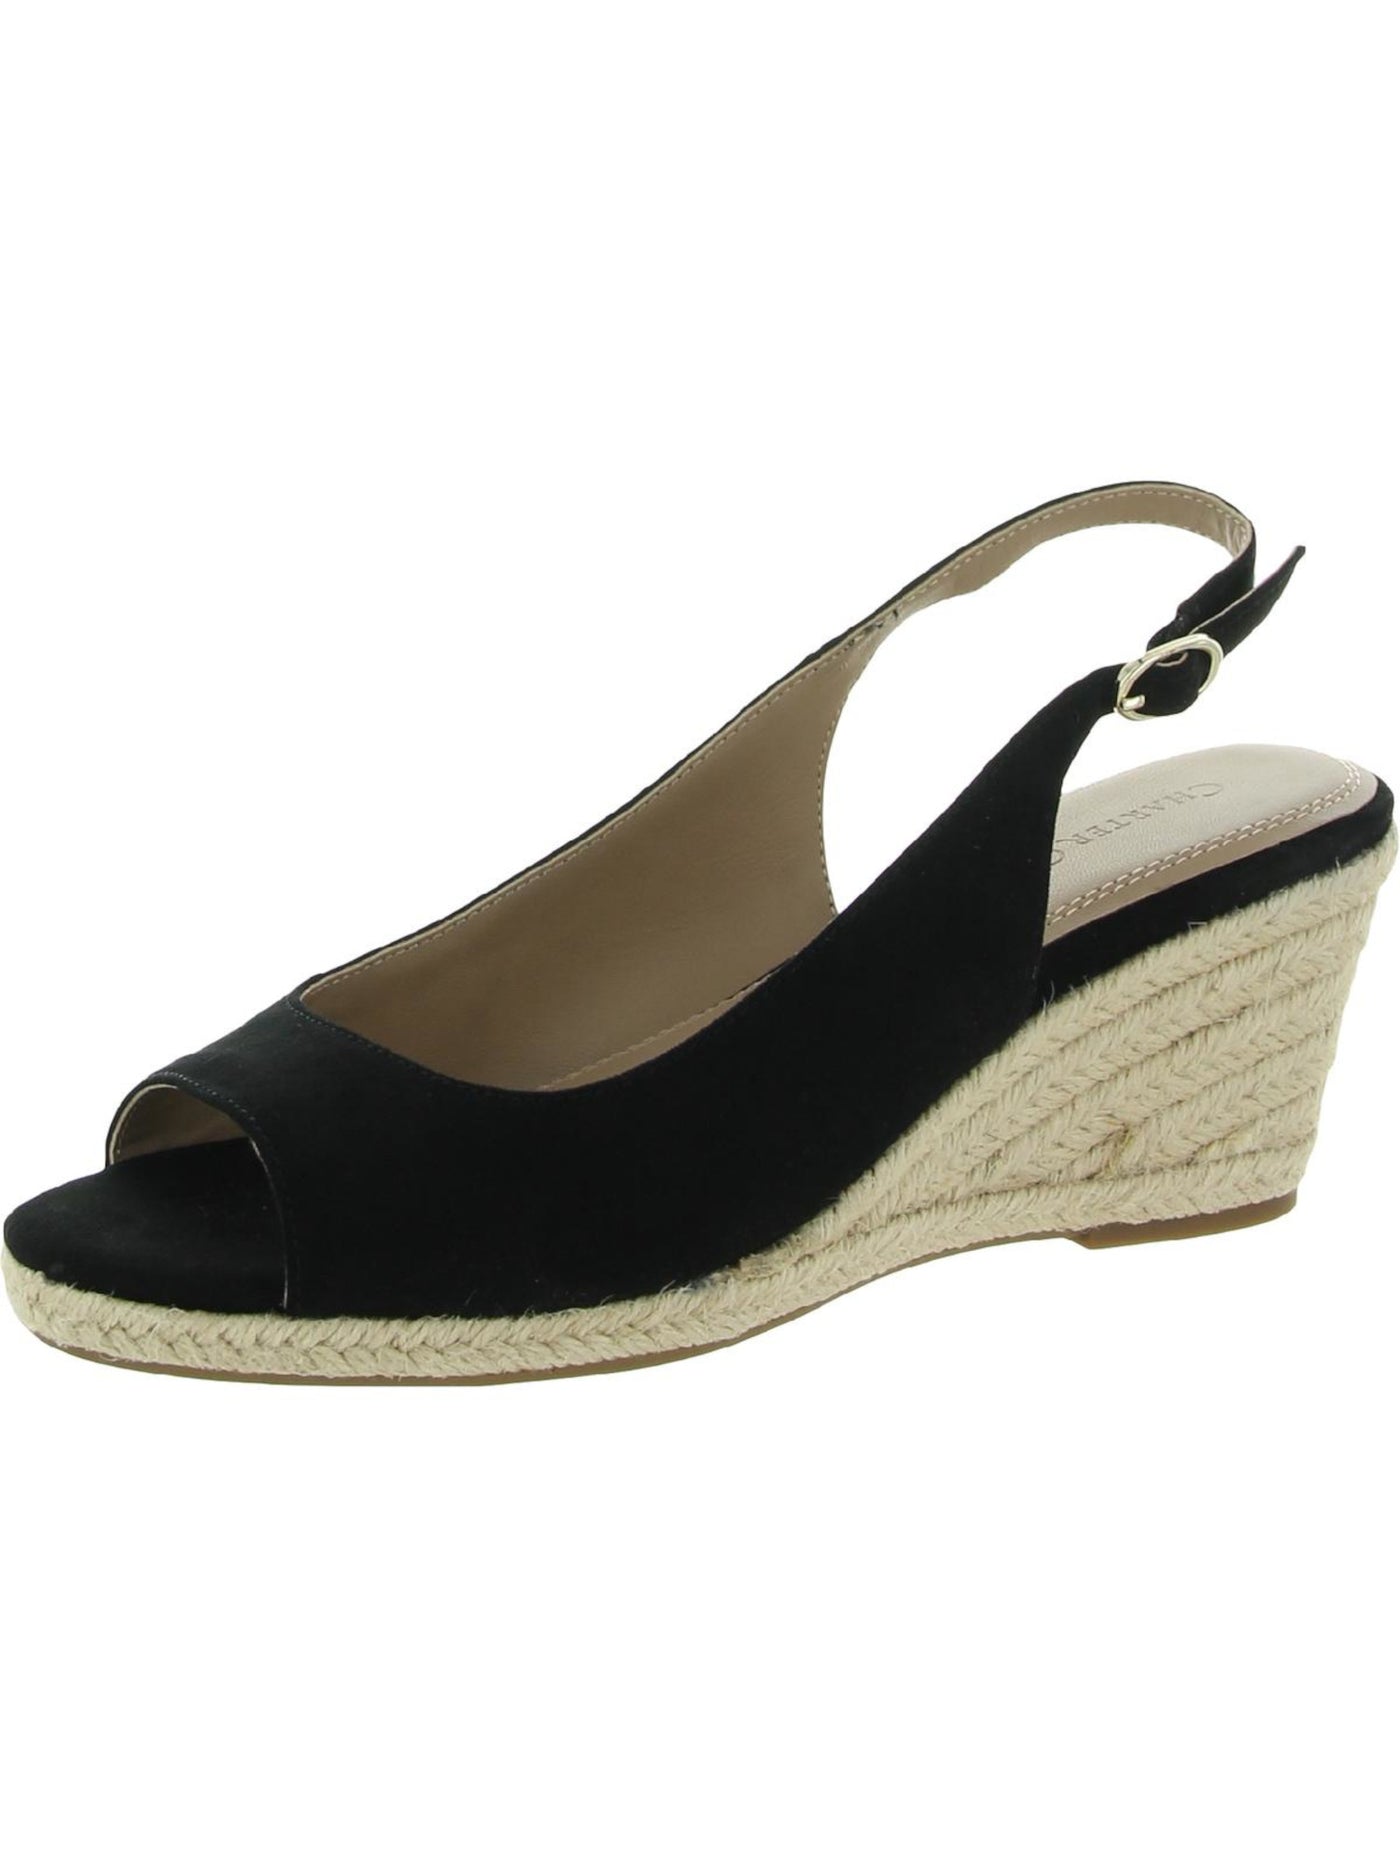 CHARTER CLUB Womens Black Slingback Comfort Tamaare Round Toe Wedge Buckle Espadrille Shoes 7 M